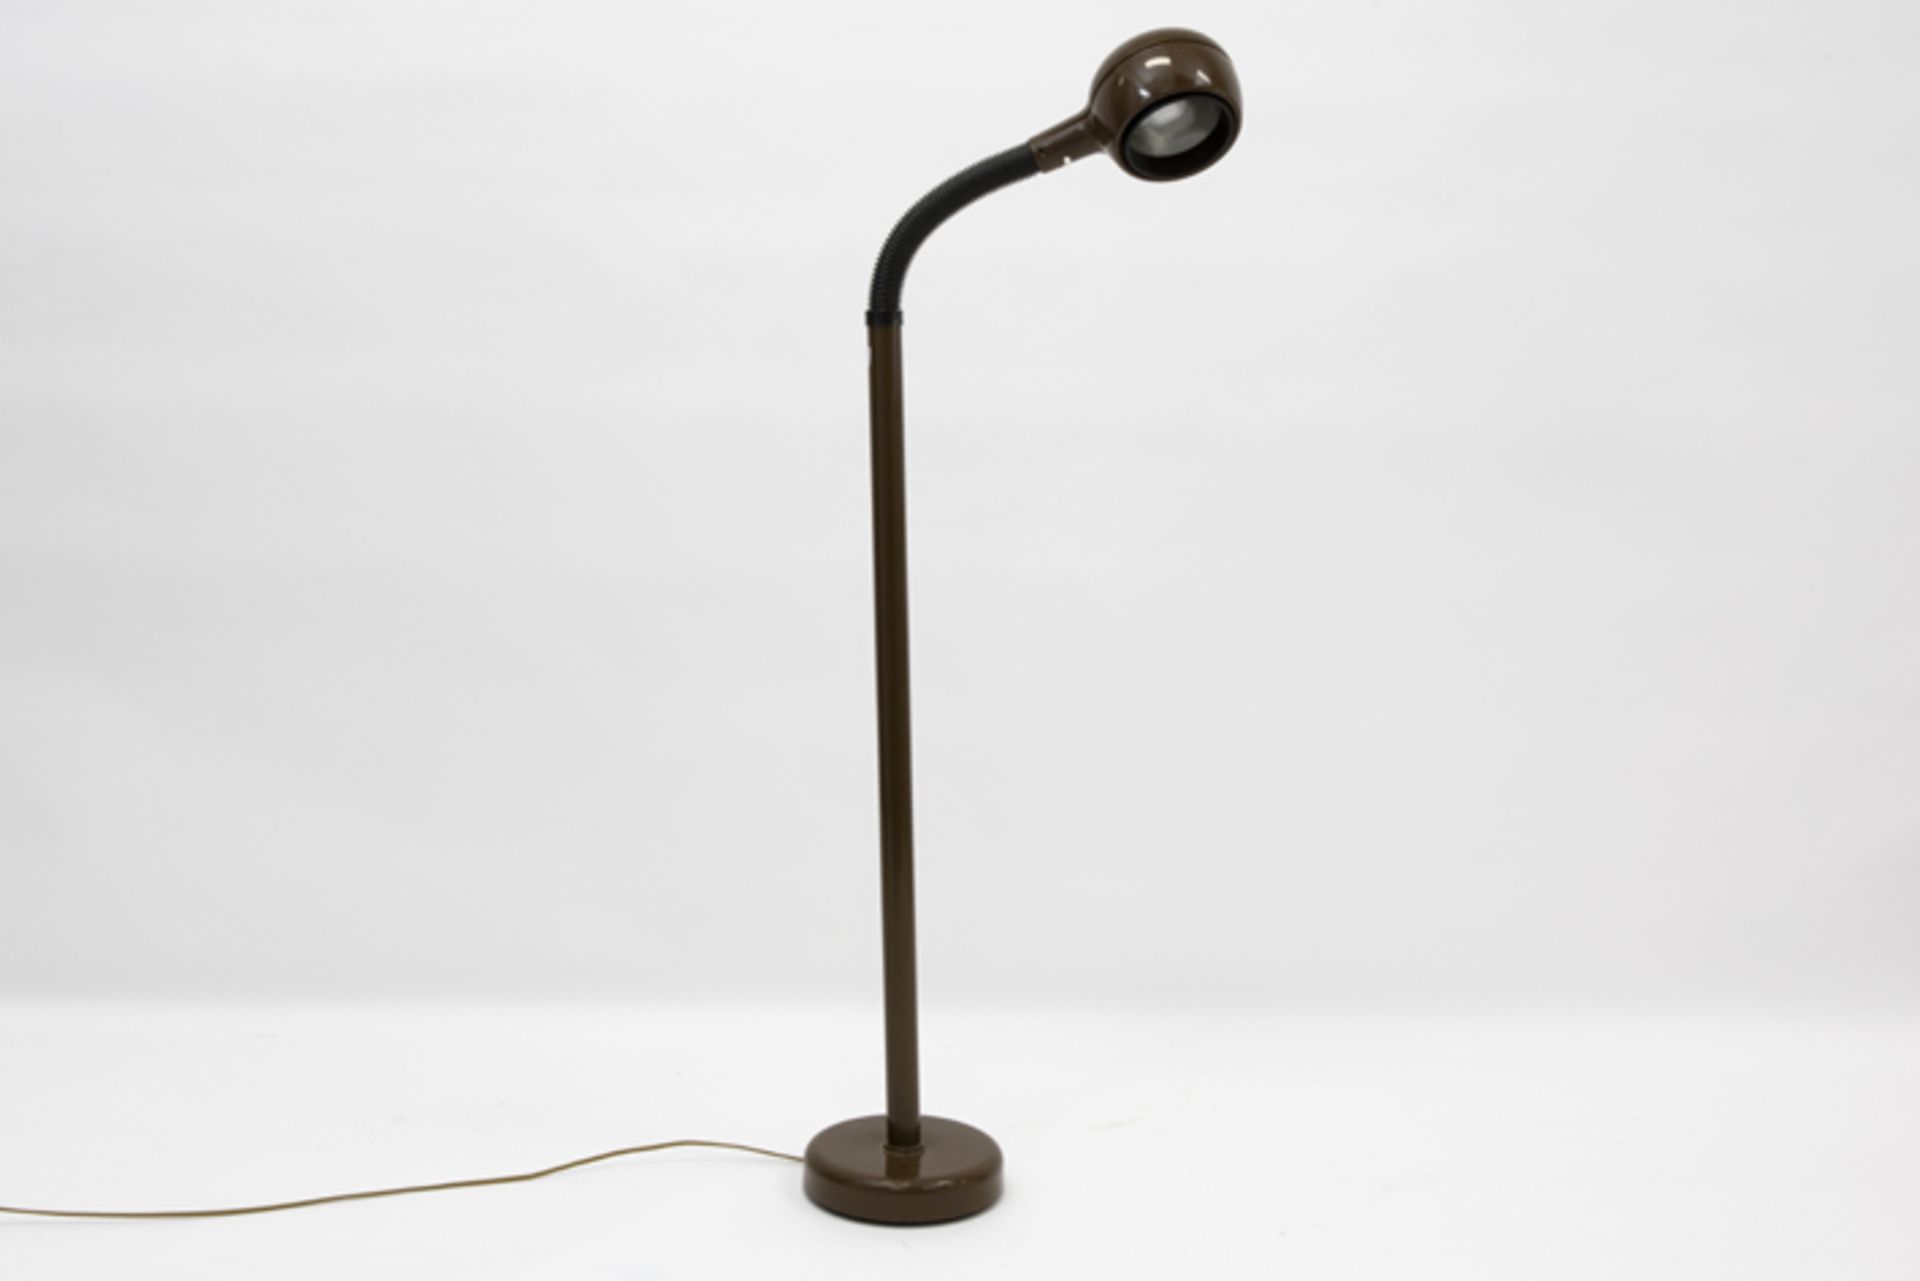 seventies' "Fagerhults Austria" marked lamp in brown plastic FAGERHULTS - AUSTRIA staande designlamp